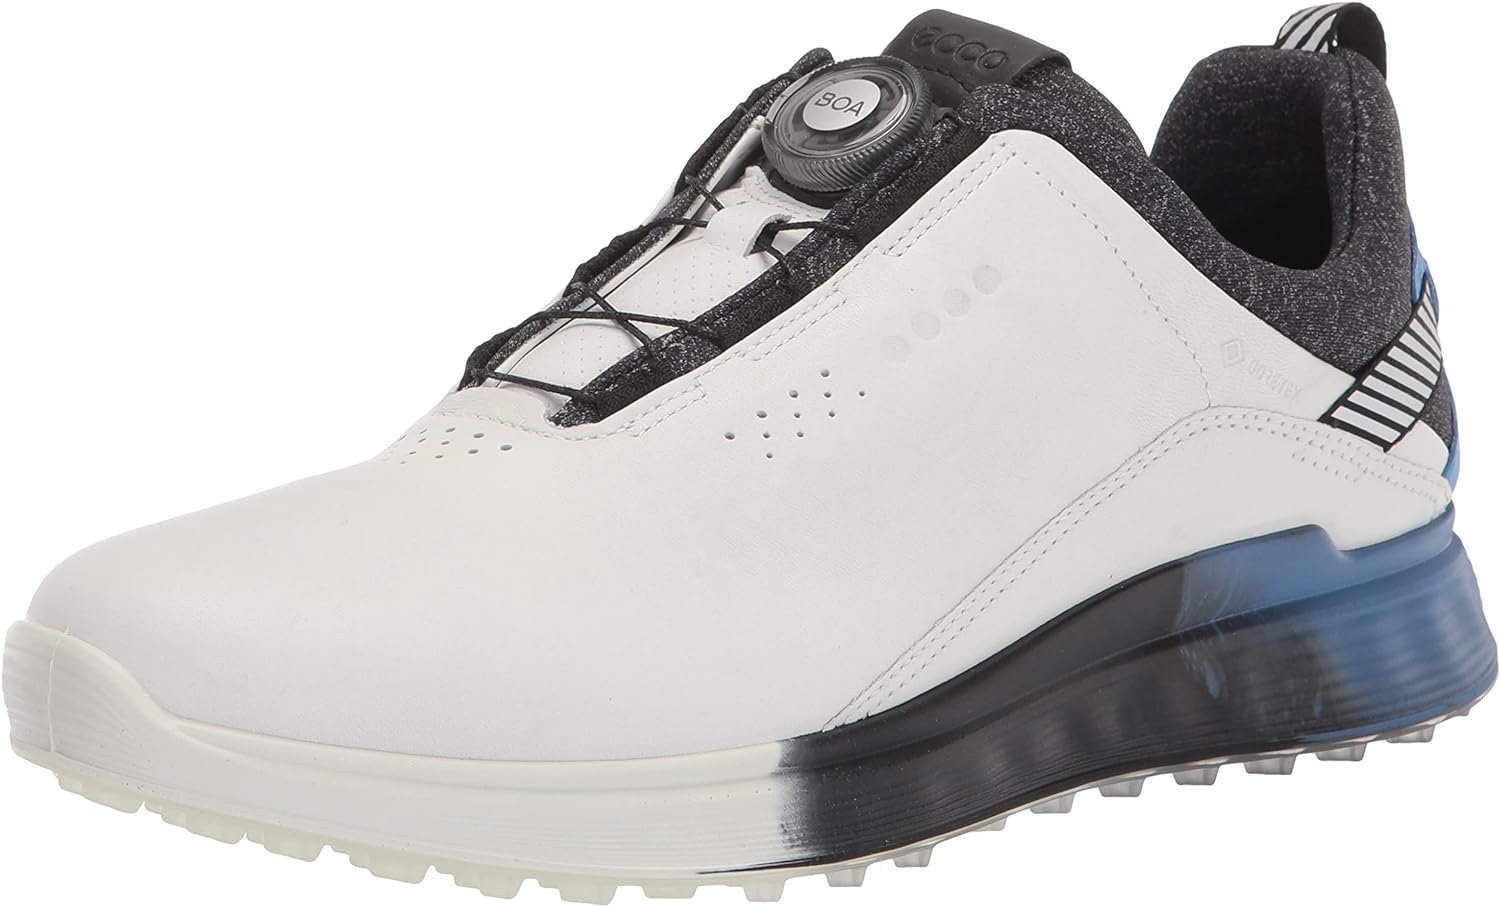 ECCO Mens 2022 Golf S-Three Spikeless Breathable Waterproof Leather Golf Shoes